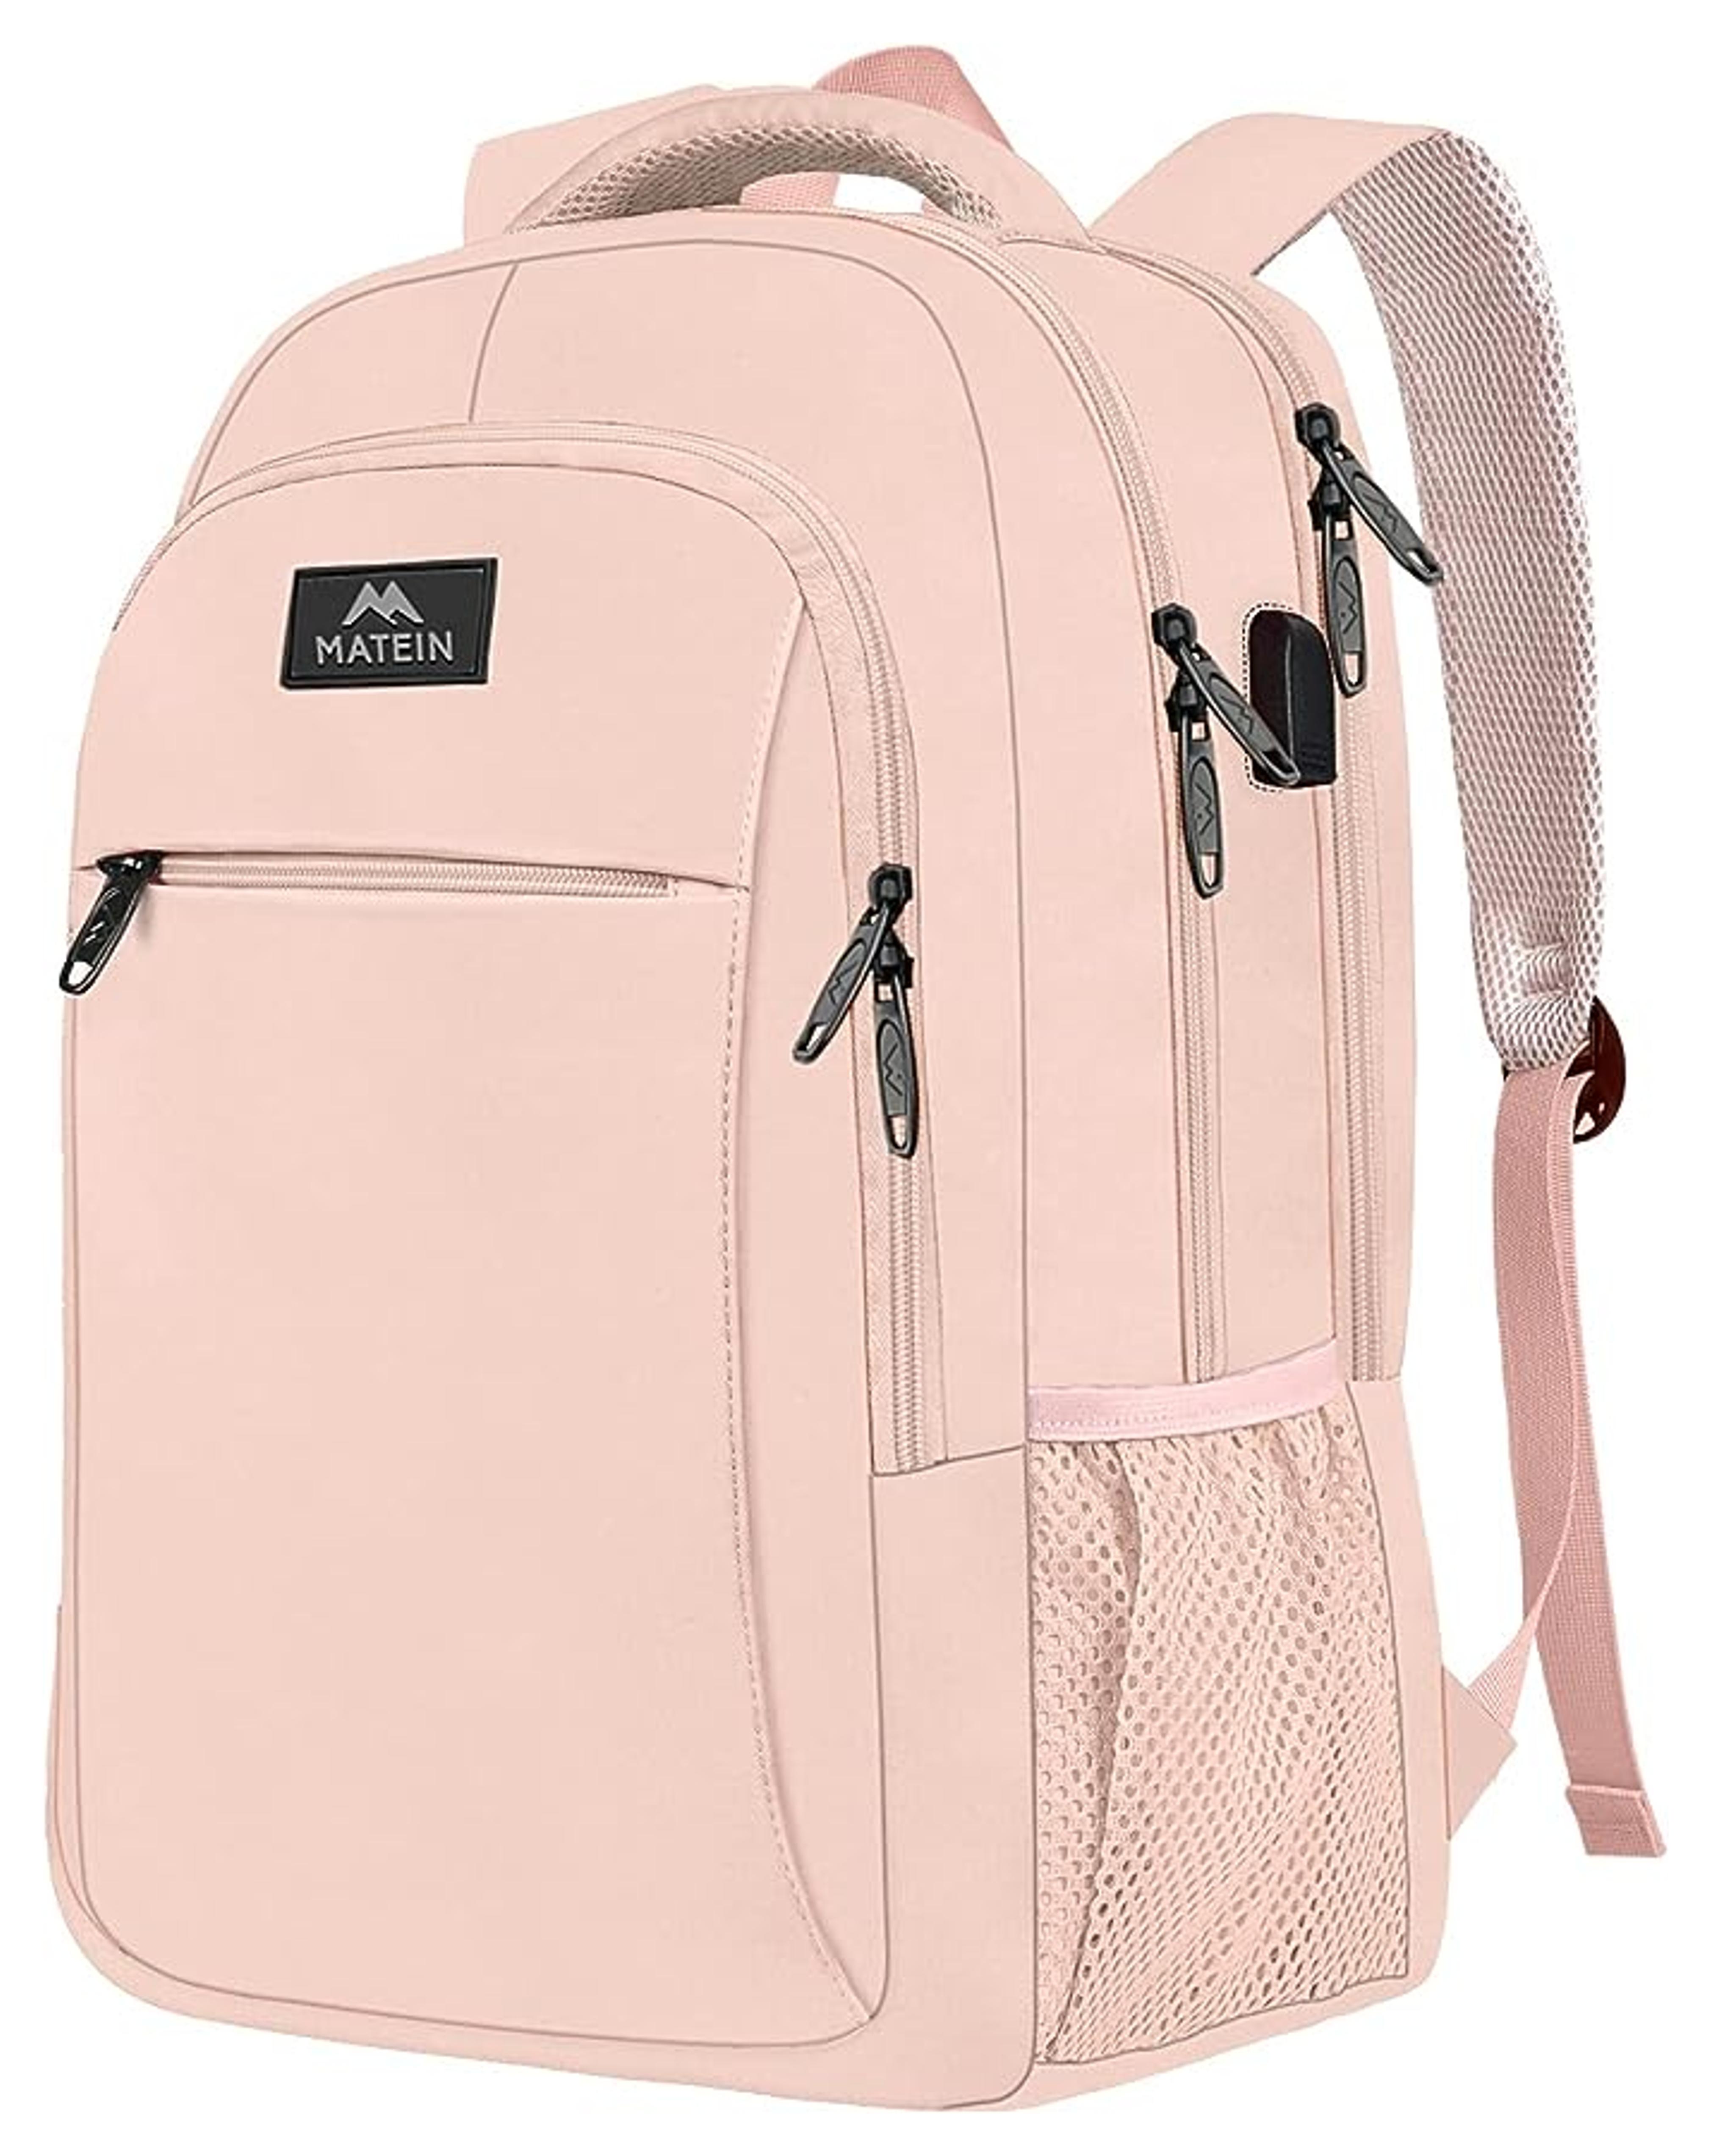 Amazon.com: MATEIN 14 Inch Laptop Backpack, Anti Theft Travel Backpack with USB Charging Port, Water Resistant Lightweight Cute Daily Backpack Computer Daypack Fits Macbook Up to 14inch for Women, Pink : Electronics